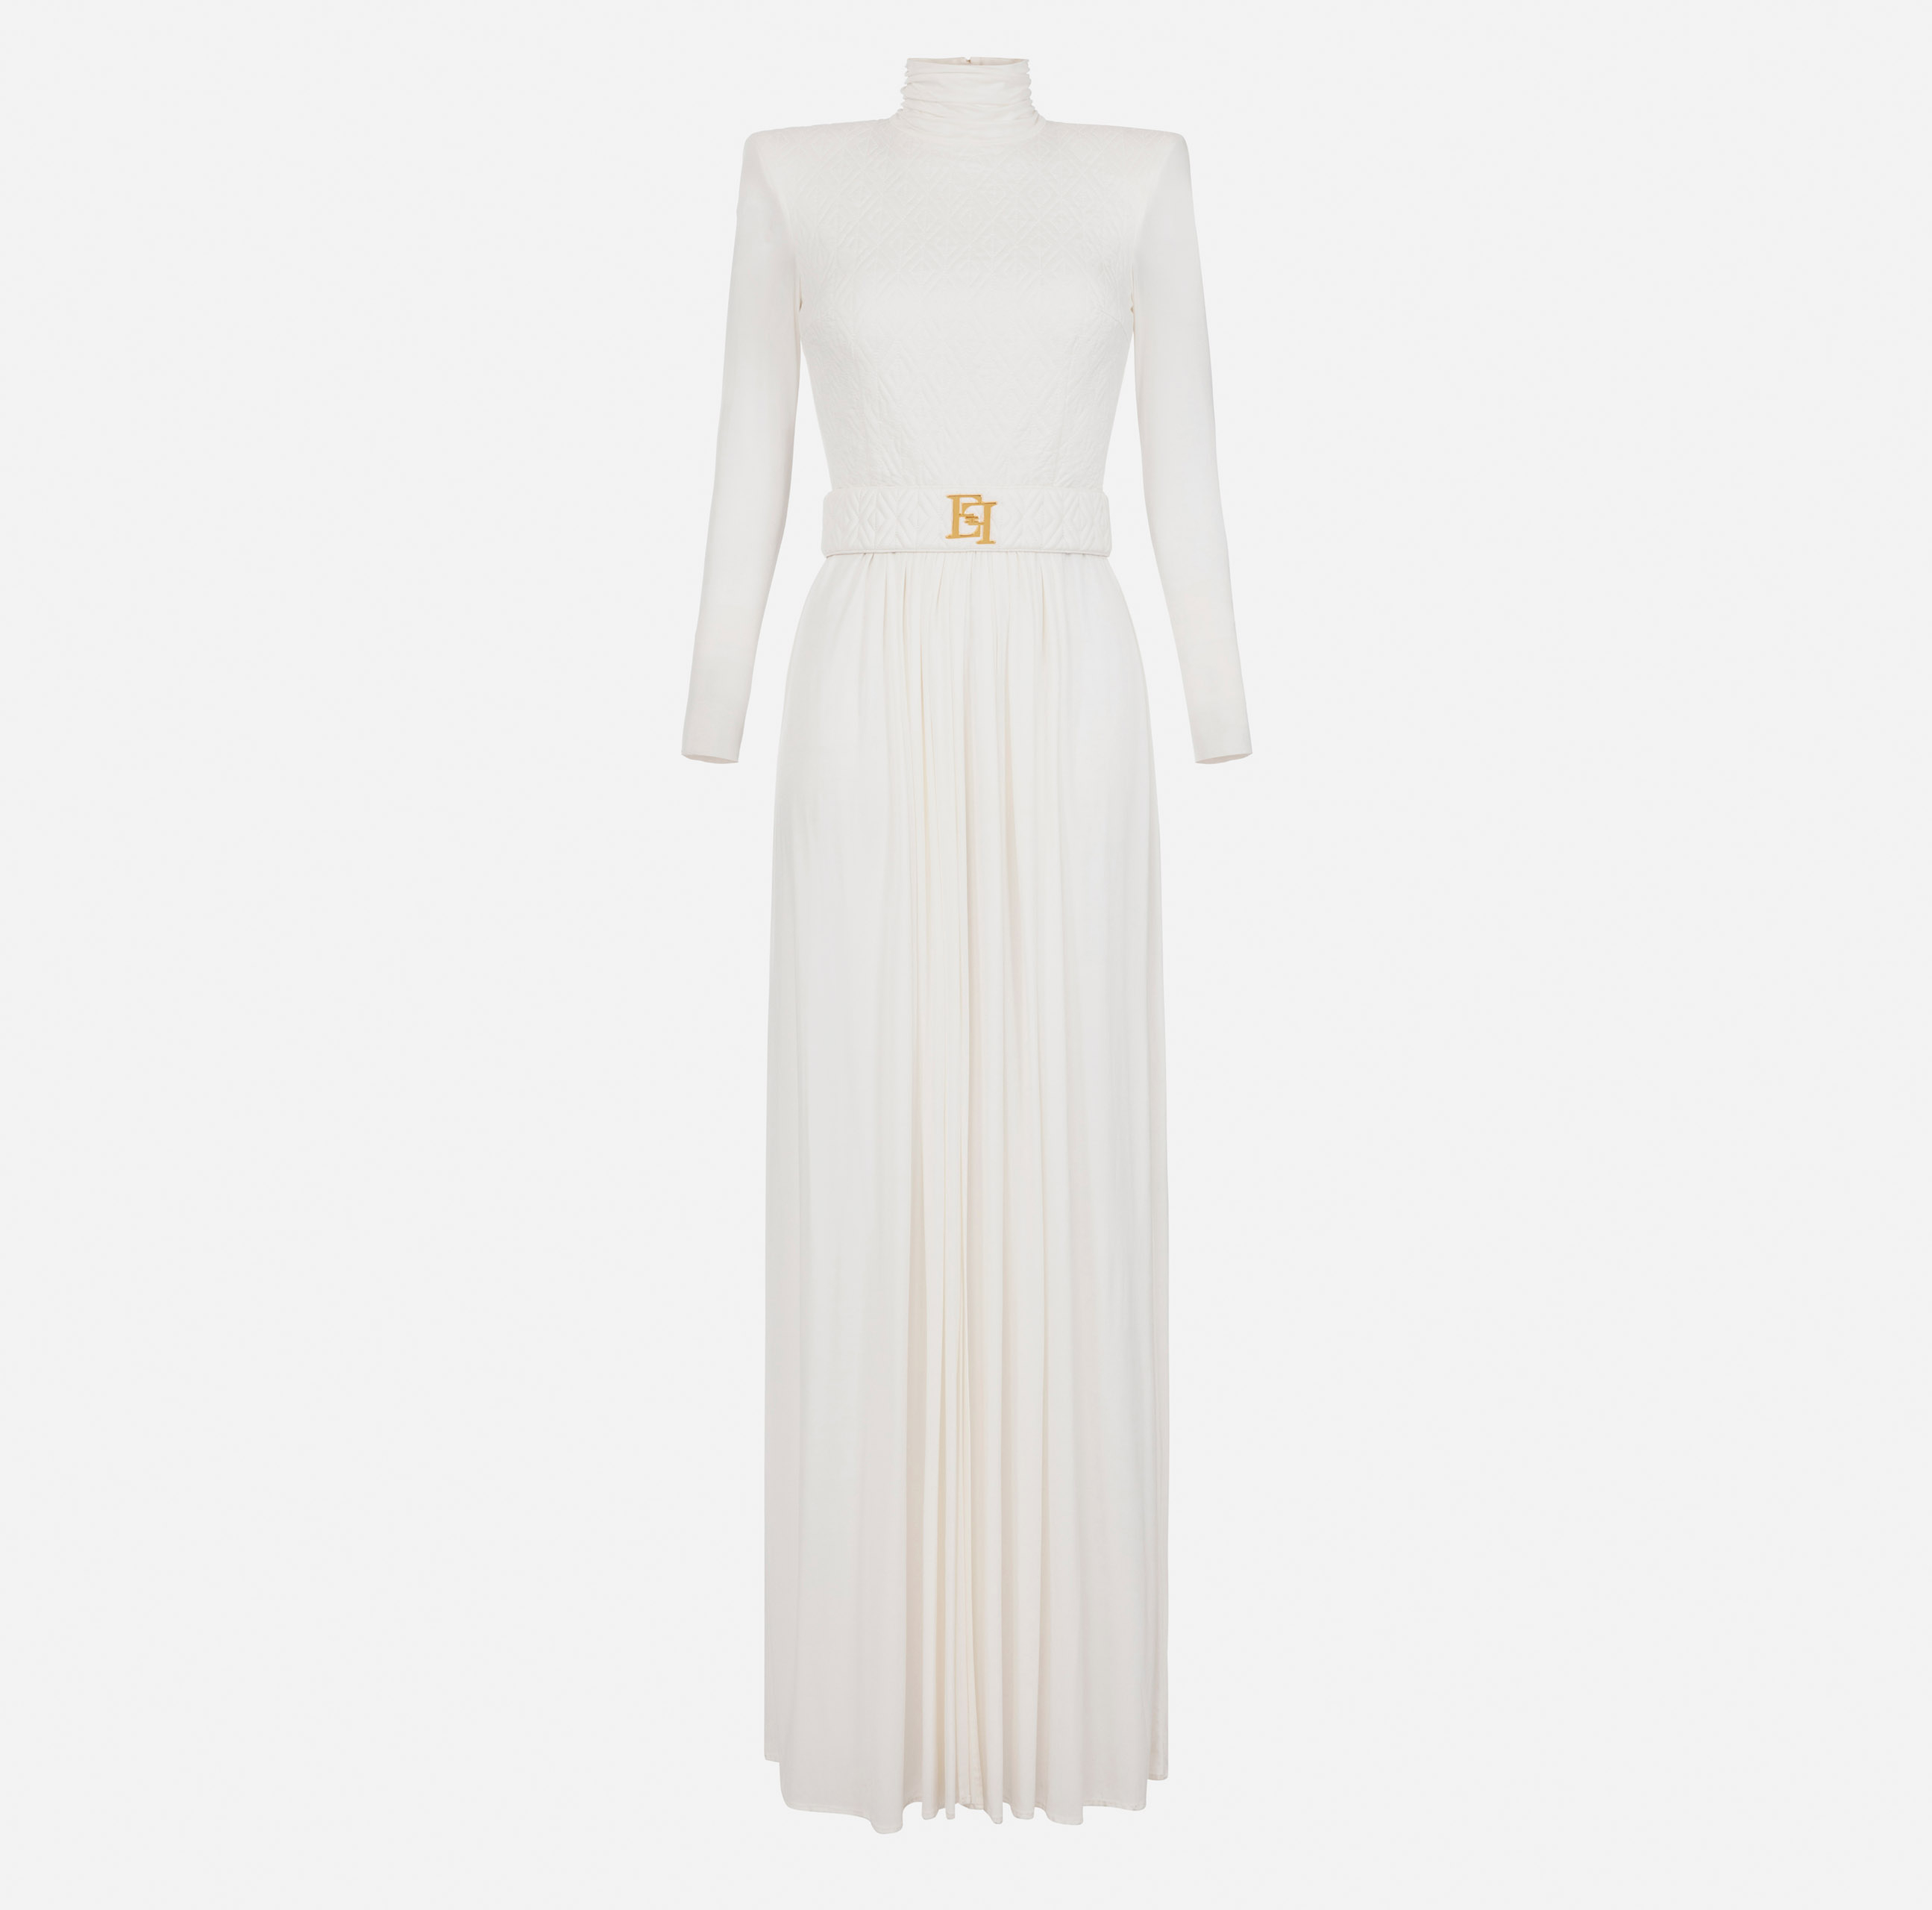 Red Carpet dress in jersey with embossed embroidery - ABBIGLIAMENTO - Elisabetta Franchi